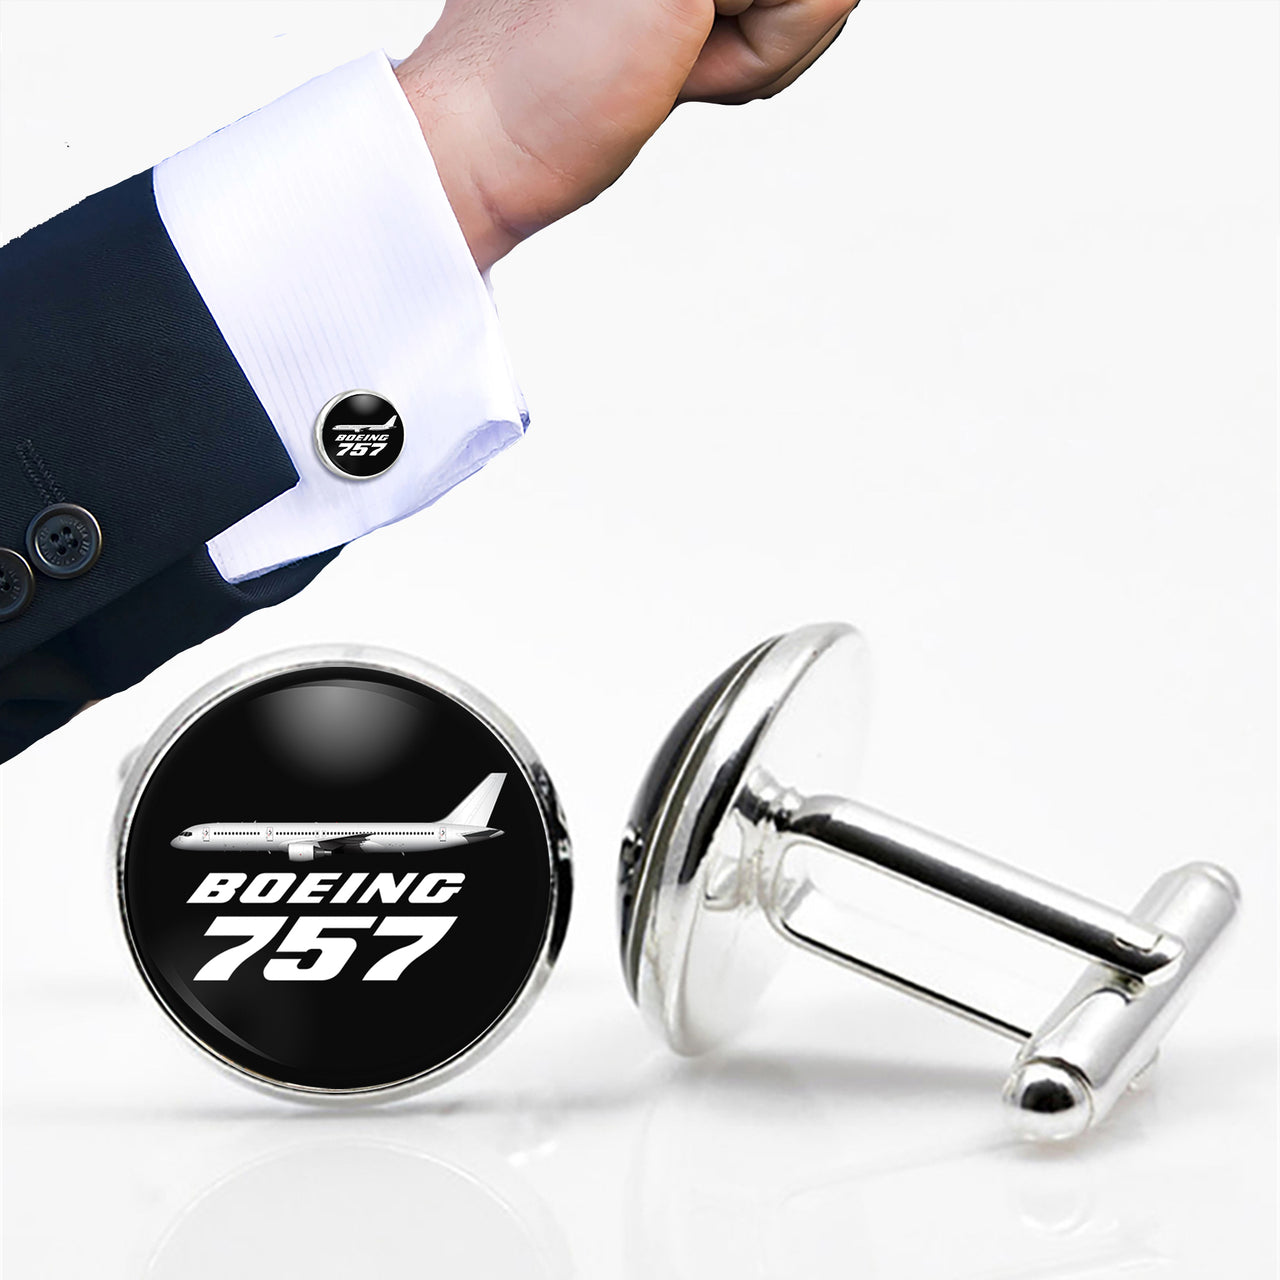 The Boeing 757 Designed Cuff Links